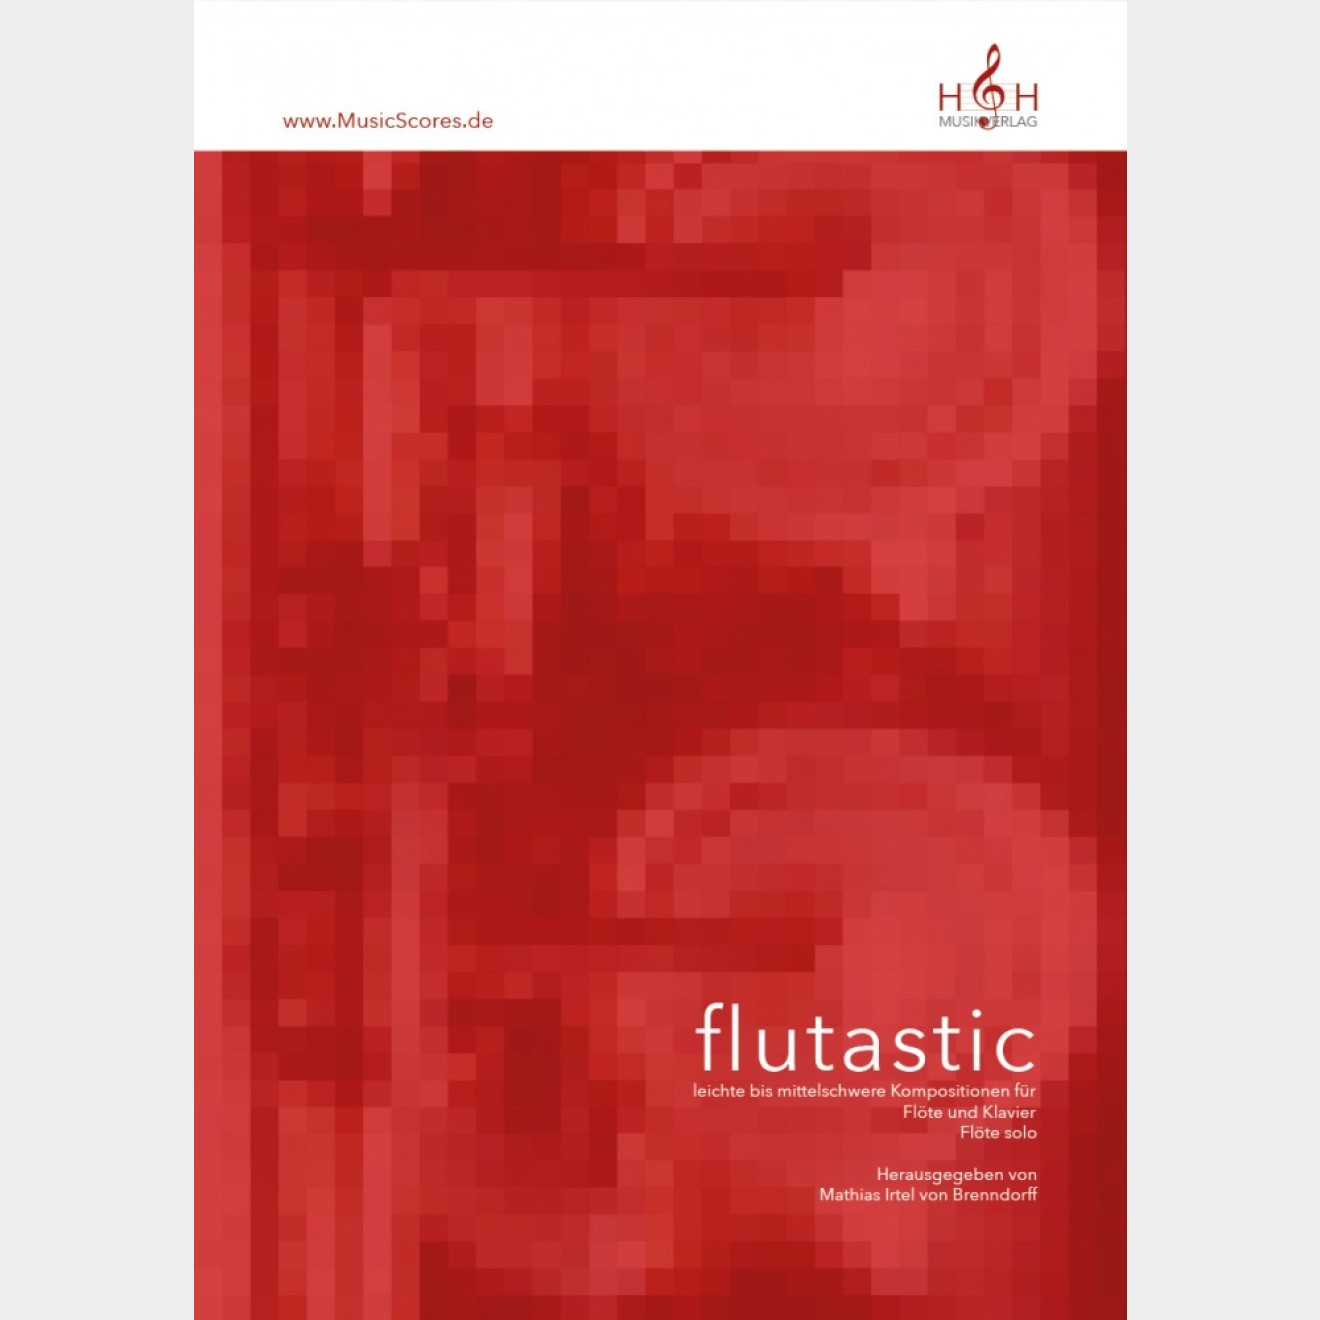 flutastic - compositions für flute and flute and piano (easy to moderate)